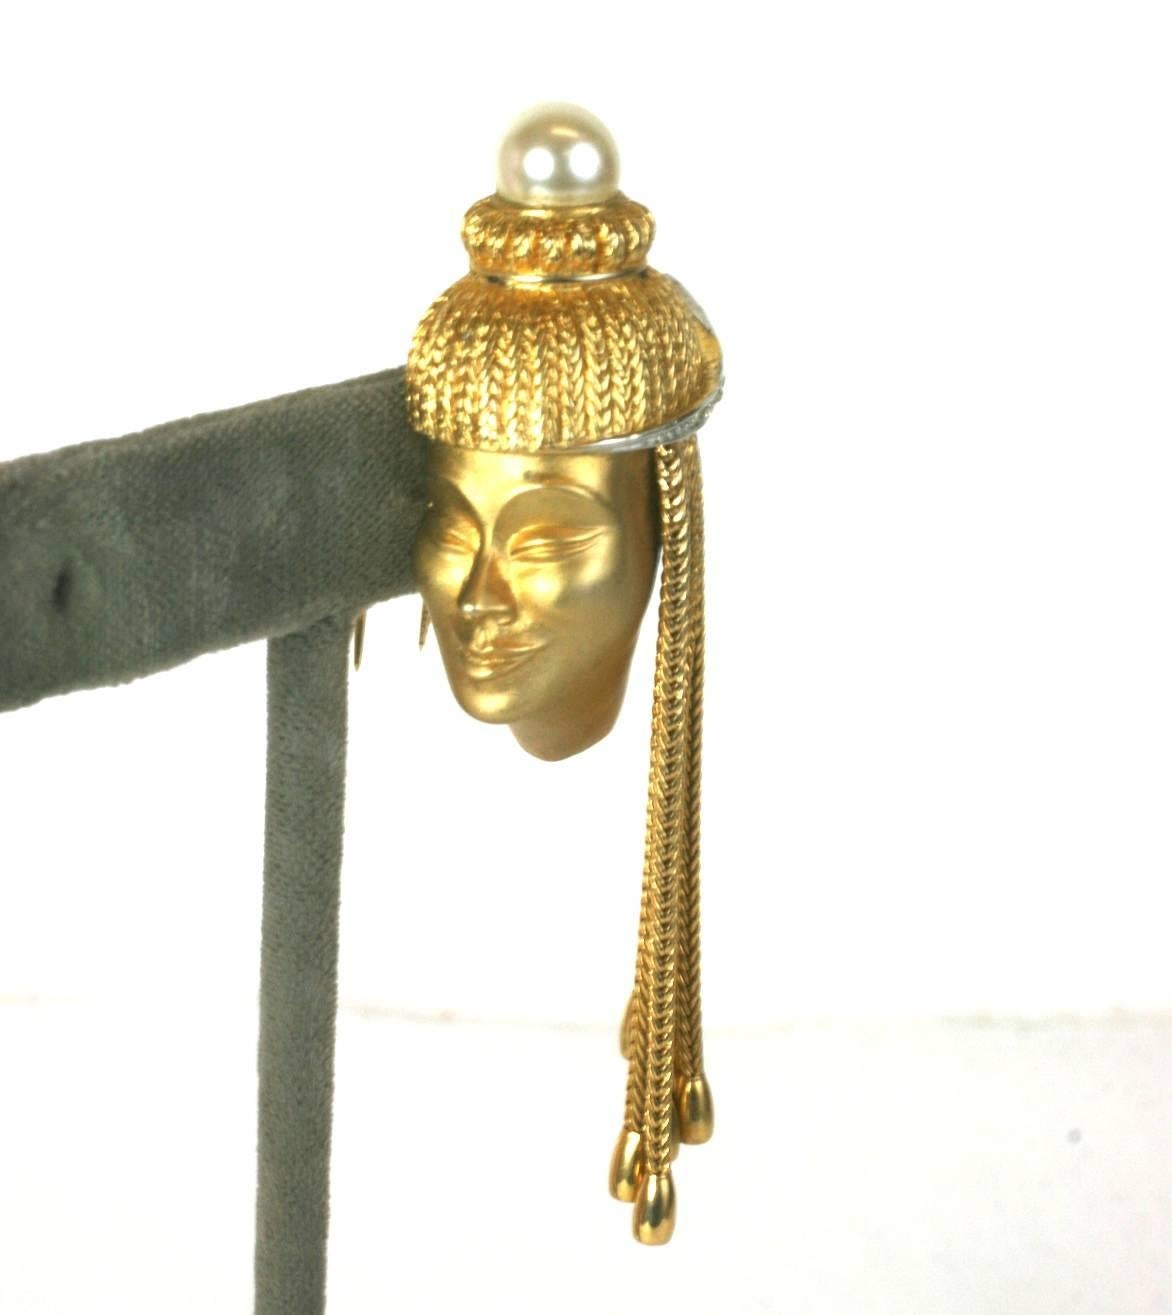 Charming Marcel Boucher Genie Clip. Unusual clip with a smiling genie with hair made from gilt fox chains with pave accents. A faux pearl is the accent at the top of the clip. The face is detailed in a satin finish, contrasting against the high gold